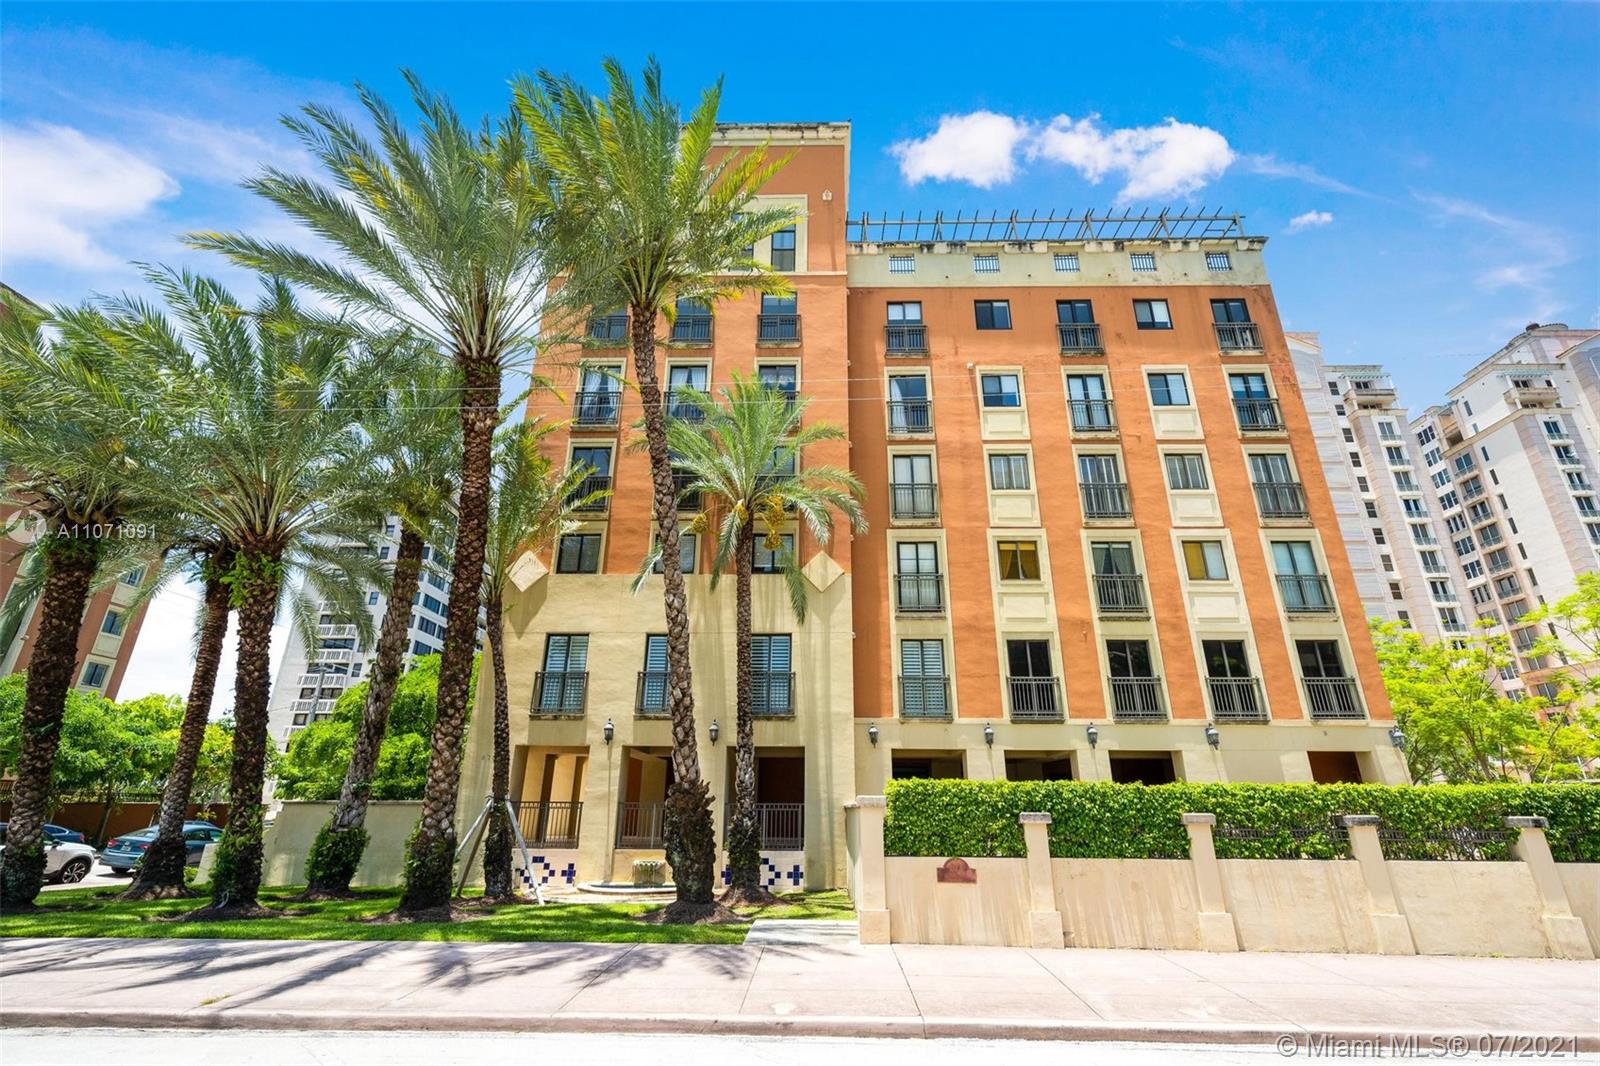 Enjoy the urban Coral Gables living at large in this beautiful condo built in 2001, located on prestigious Biltmore Way. This gorgeous bright and spacious corner unit features 3 bedrooms, 2.5 bathrooms, a large master bedroom with a walking closet, high ceilings, impact-resistant windows, tile floors throughout, 2 assigned parking spaces, storage, and much more. Building under new management and to be paint, new owner will enjoy the improvements.
Fabulous central location, only one block away from the Granada Golf course and just a stroll from the finest restaurants on Miracle Mile, cafes, shops, and Coral Gables business district.